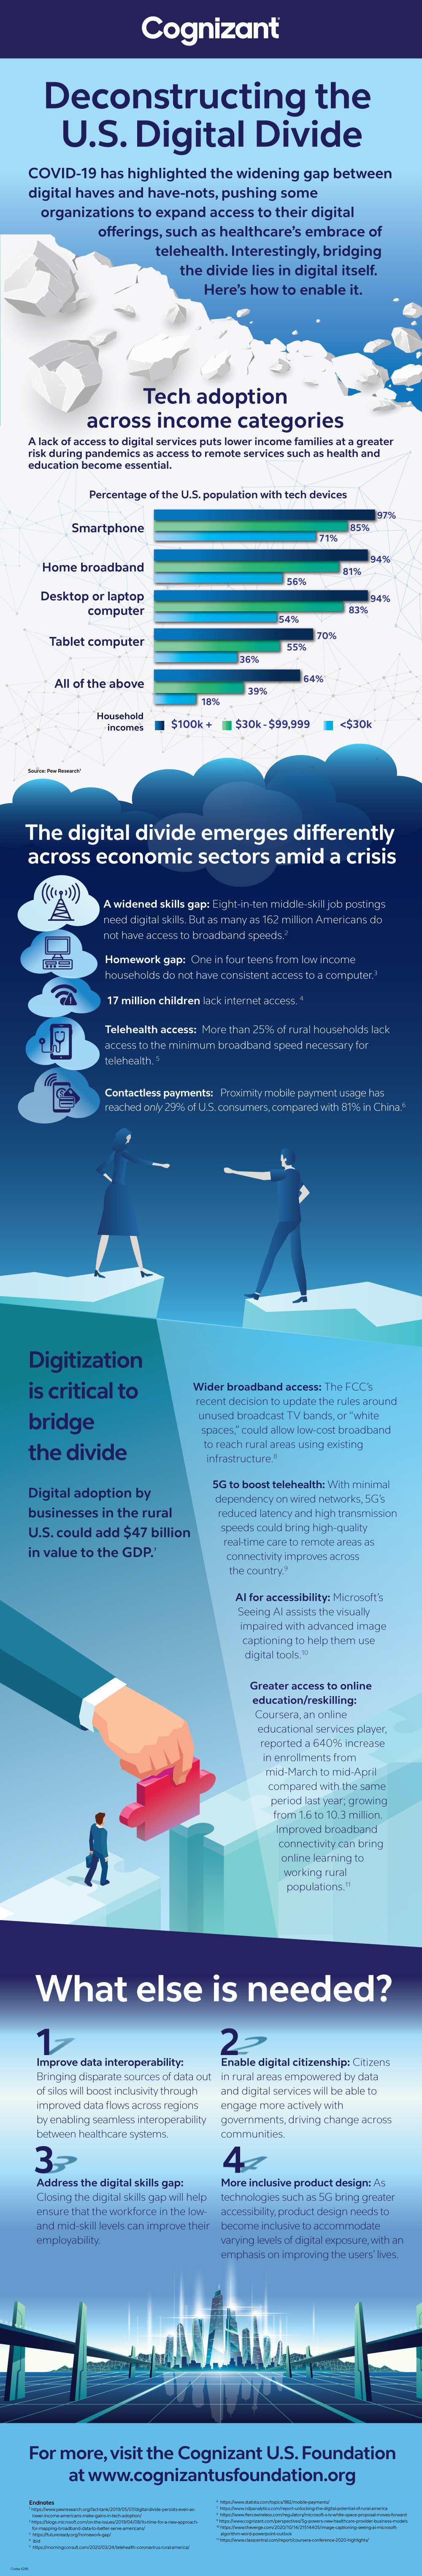 How COVID Changes the Digital Divide Debate infographic